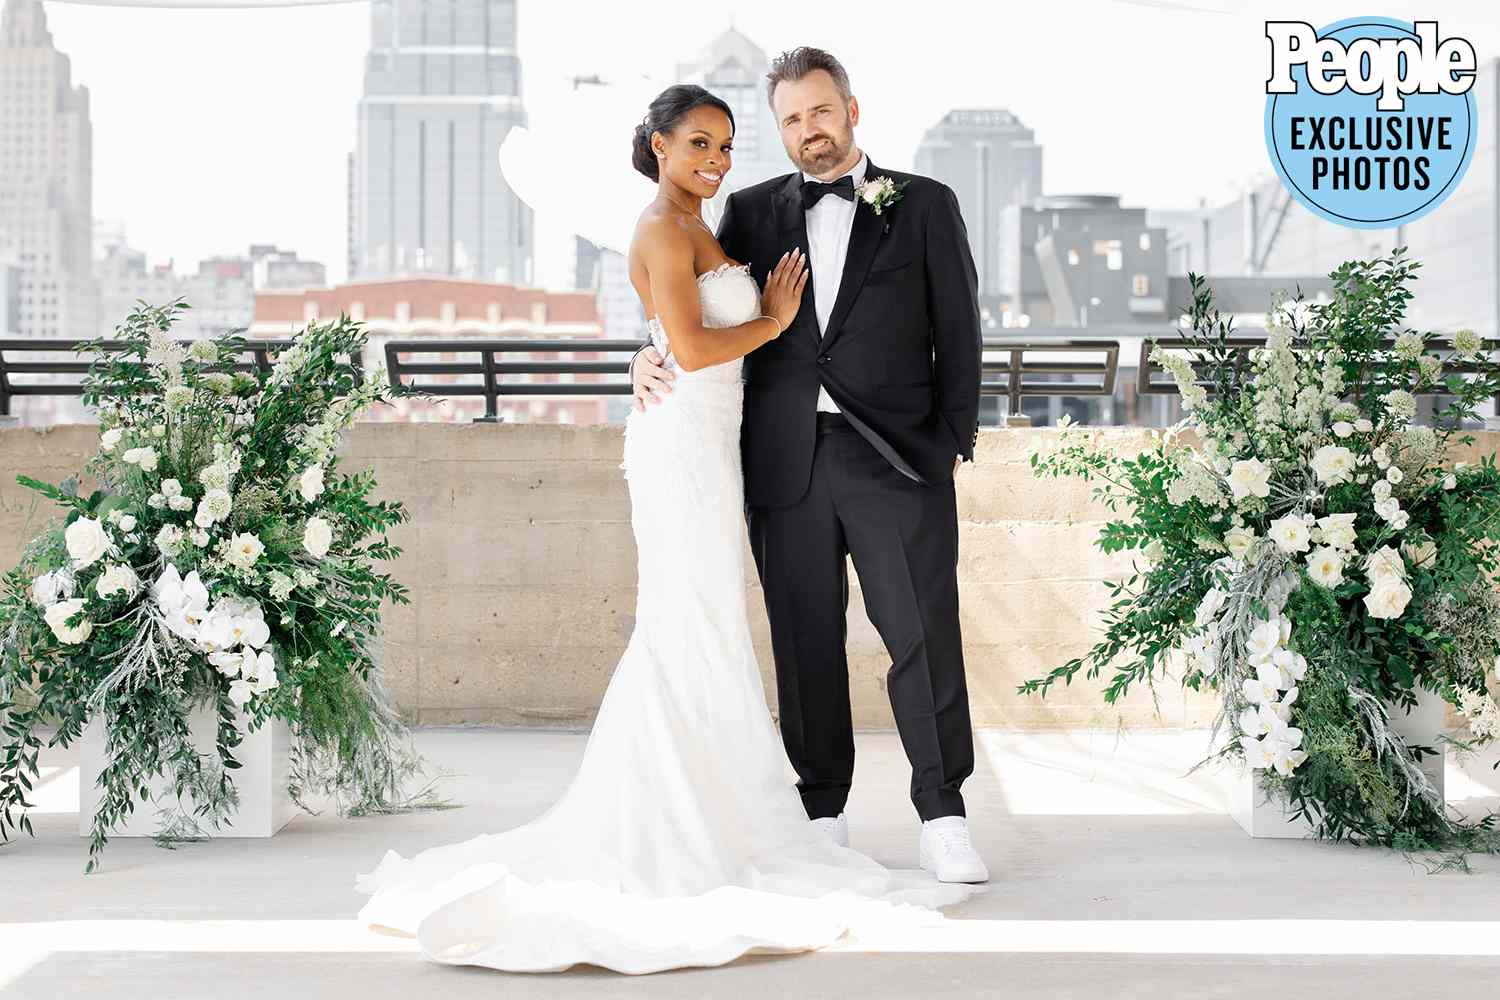 The Real World: Brooklynâs Devyn Simone Marries in Kansas City with Clinton Kelly as Officiant